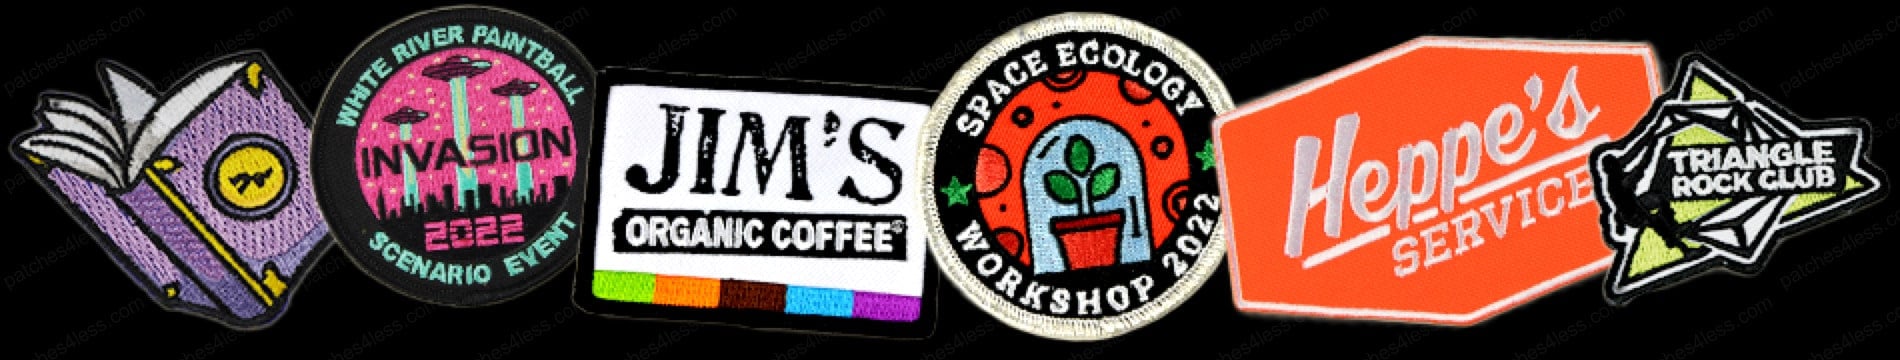 A variety of embroidered patches arranged in a row. From left to right: an open book with a purple cover, a round patch with 'White River Paintball Invasion 2022 Scenario Event' text and UFO design, a rectangular patch with 'Jim's Organic Coffee' text and colorful stripes, a round patch with 'Space Ecology Workshop 2022' text and plant in a dome design, an orange and white patch with 'Heppe's Service' text, and a patch with 'Triangle Rock Club' text and rock climbing graphic.